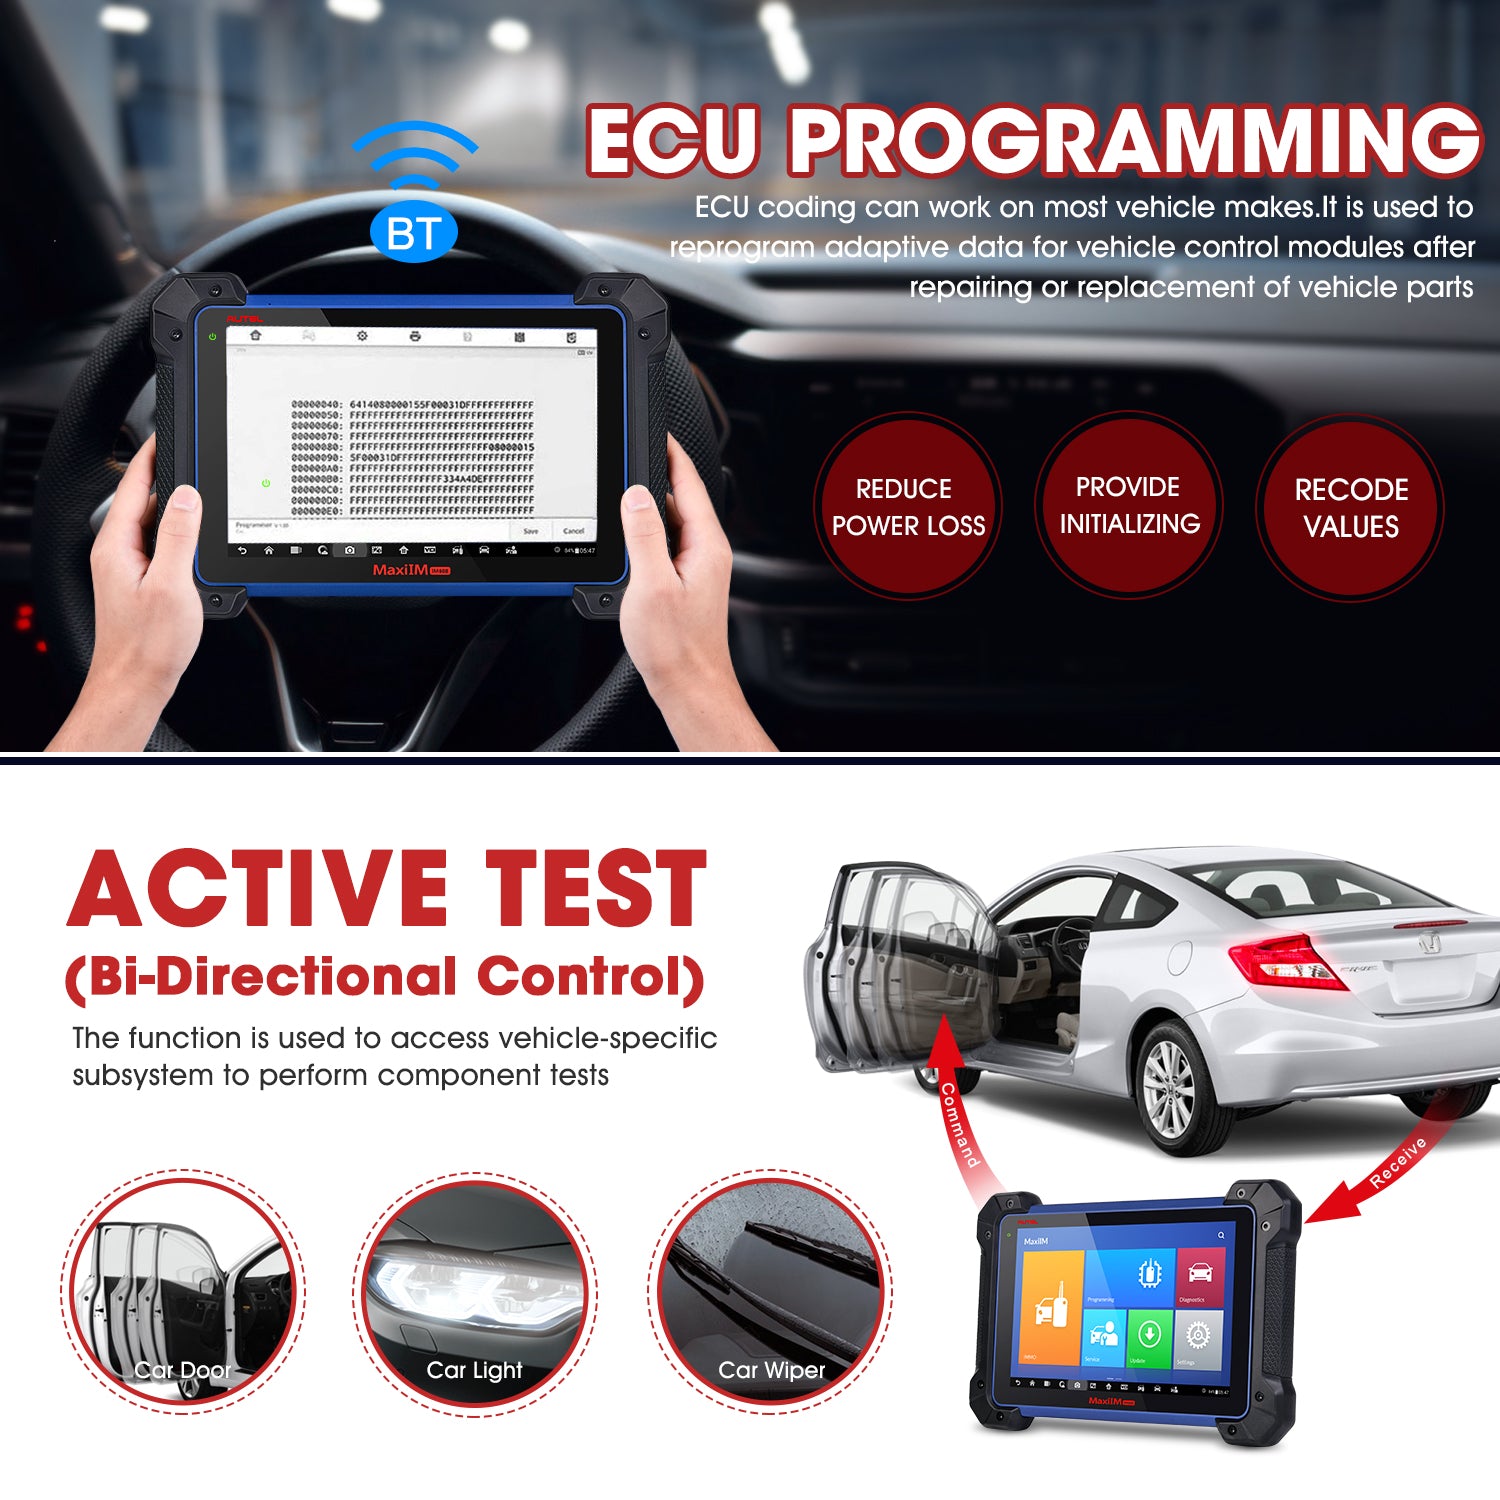 The ECU programming of the IM608 diagnostic tool can be used on most cars